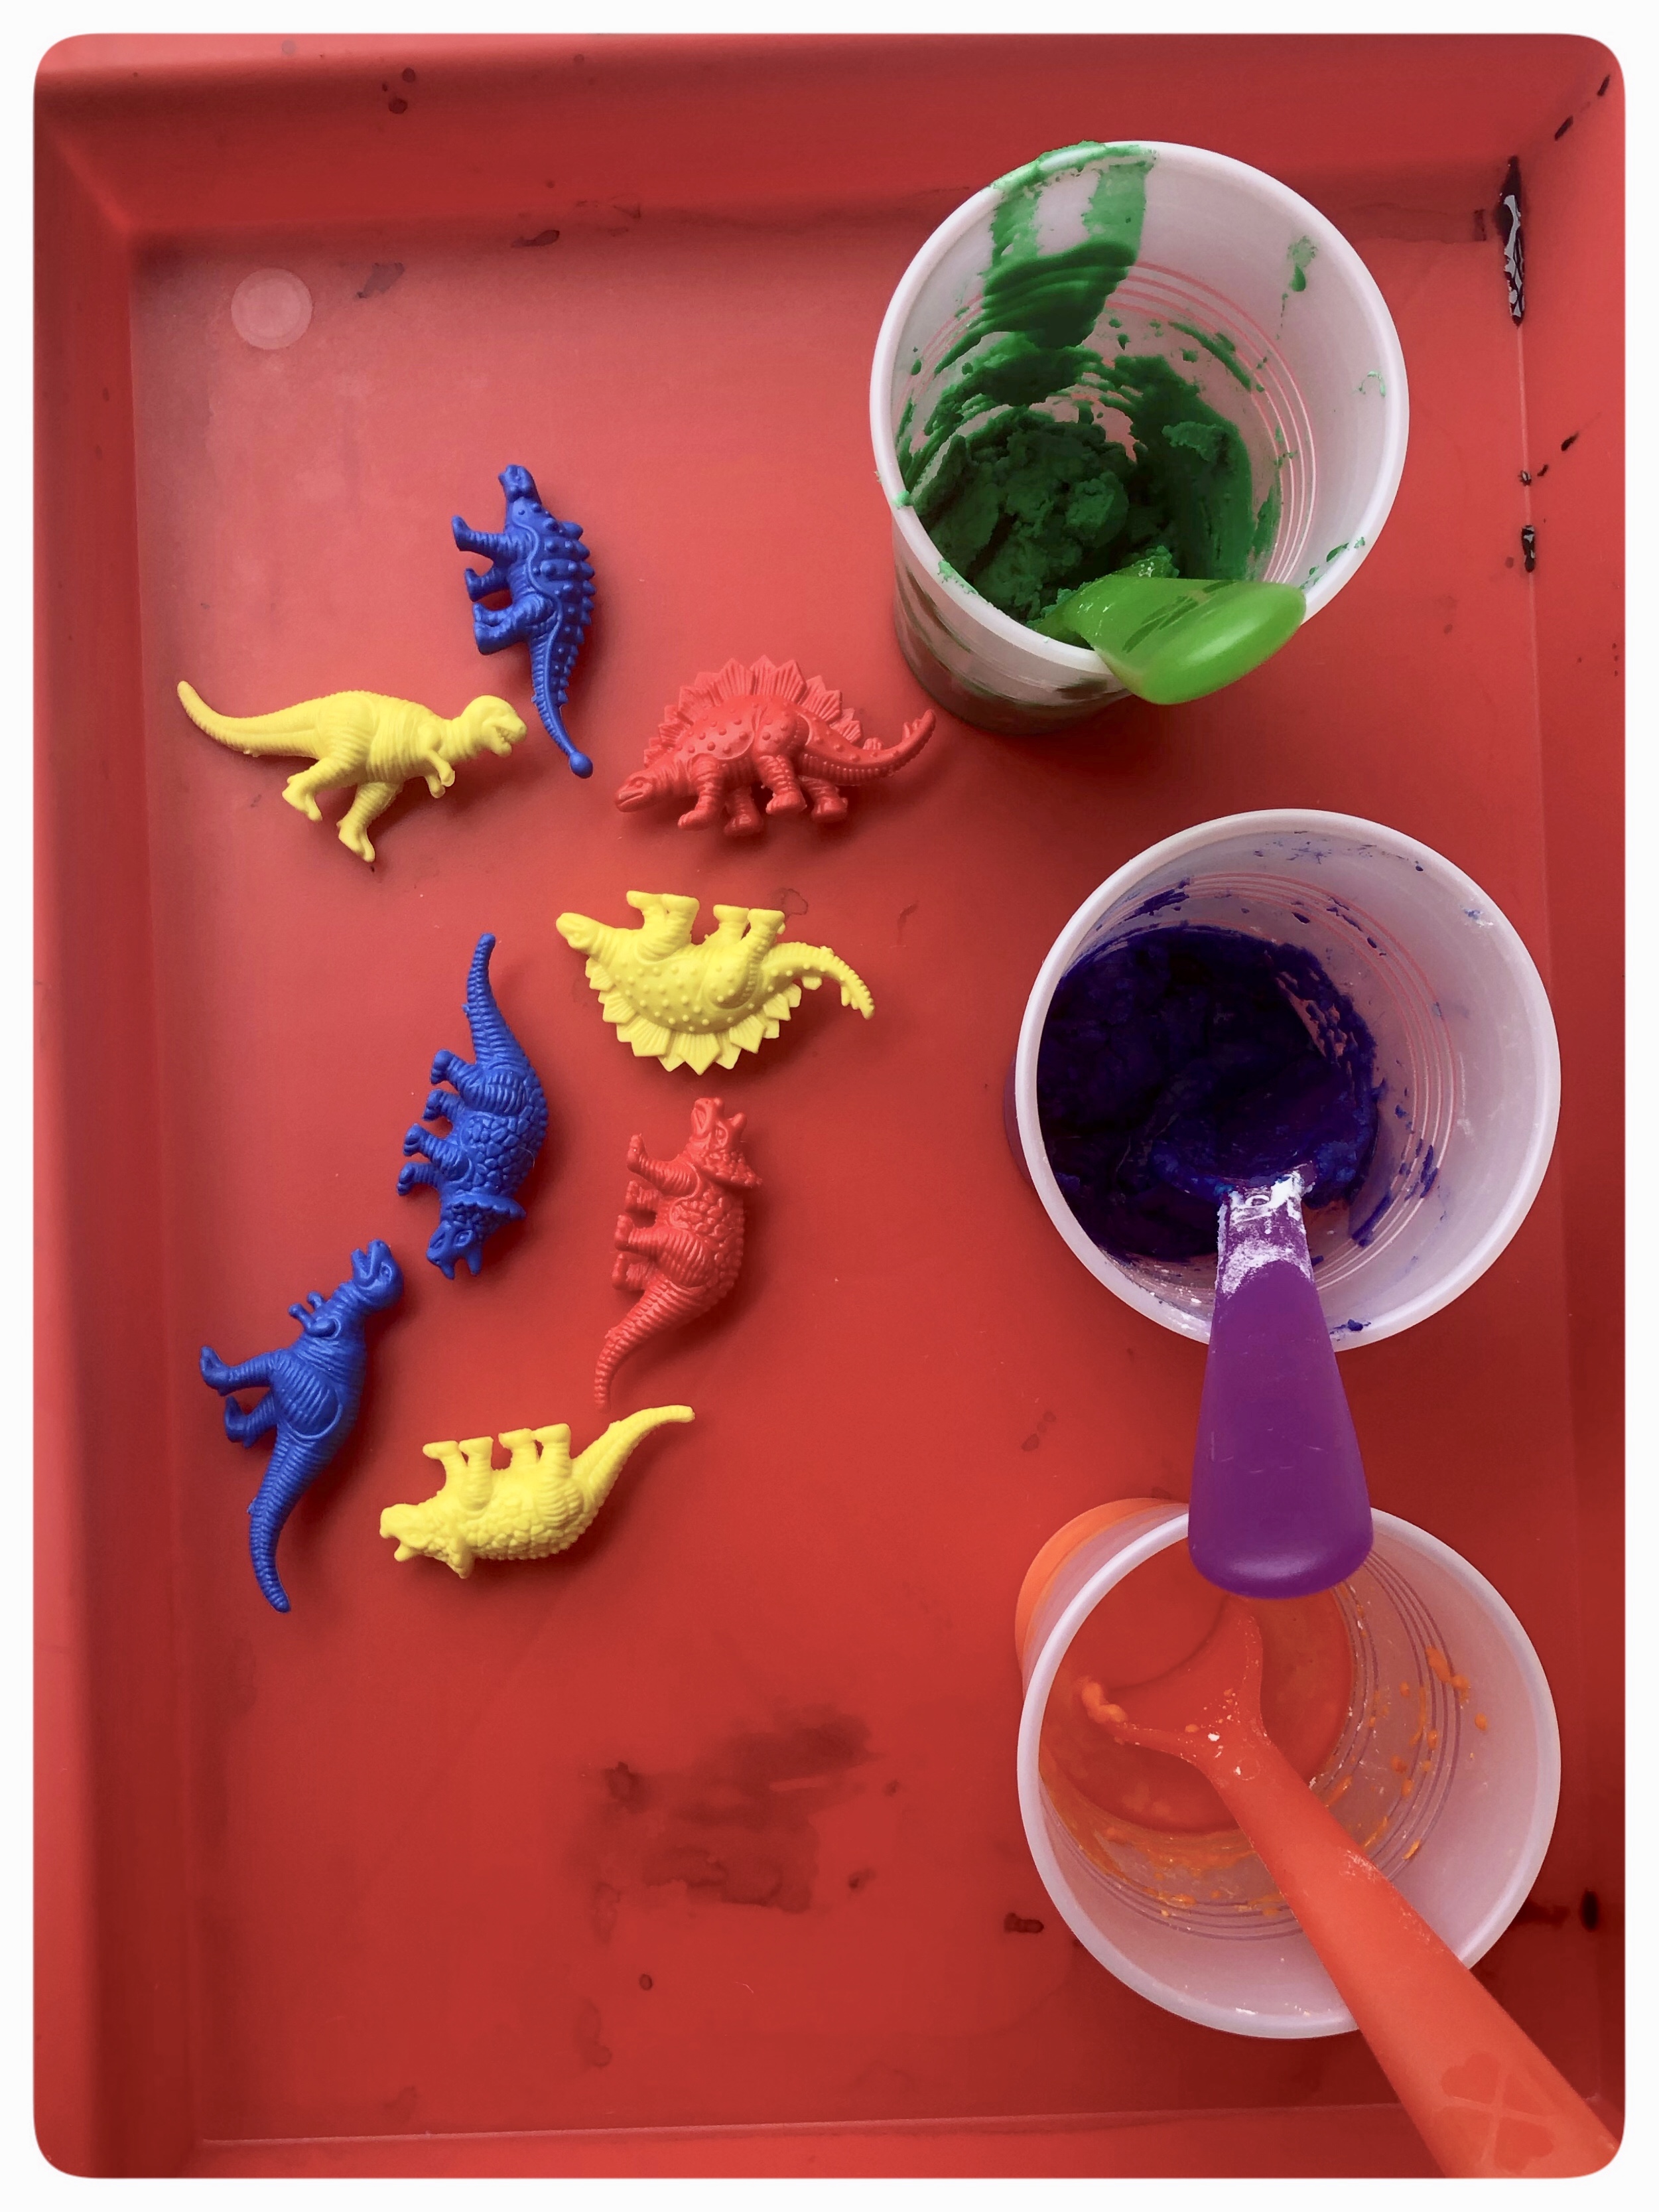 This is a fun hands-on activity that teaches kids about the chemical reaction between baking soda and vinegar while also incorporating Dinosaurs.